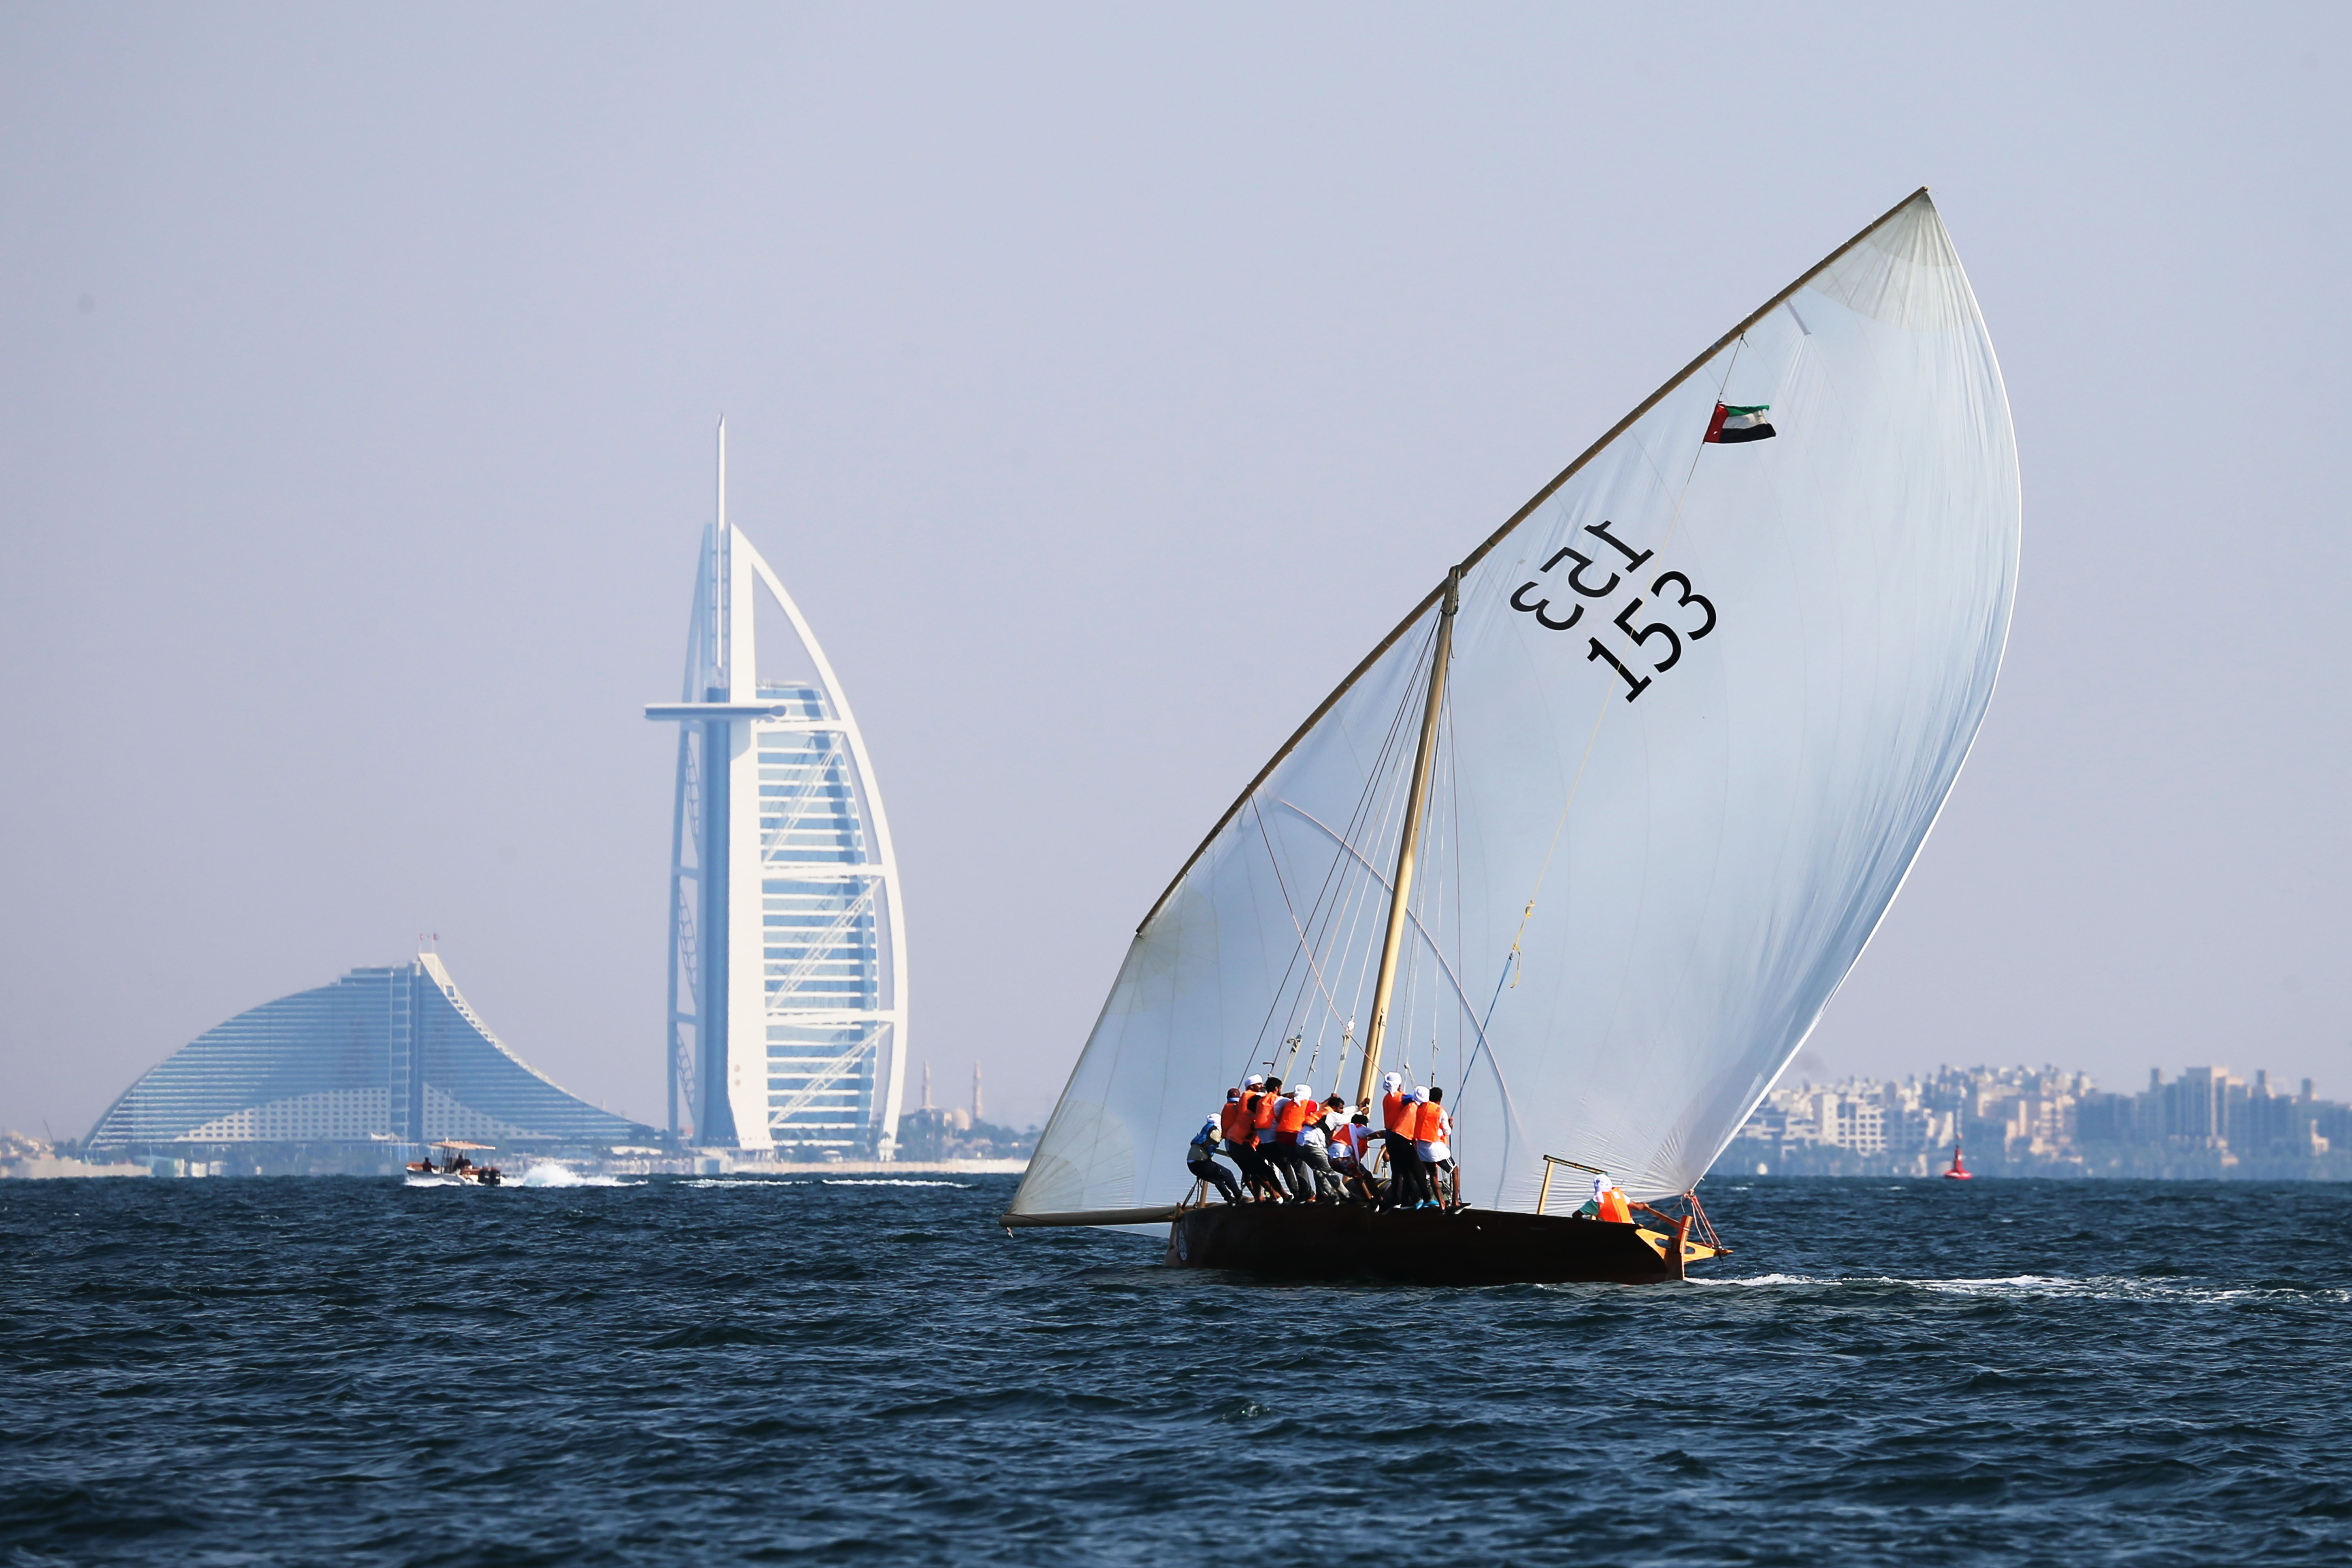 Zayed bin Hamdan boats topped the 43ft Dhow Race Overall Standing